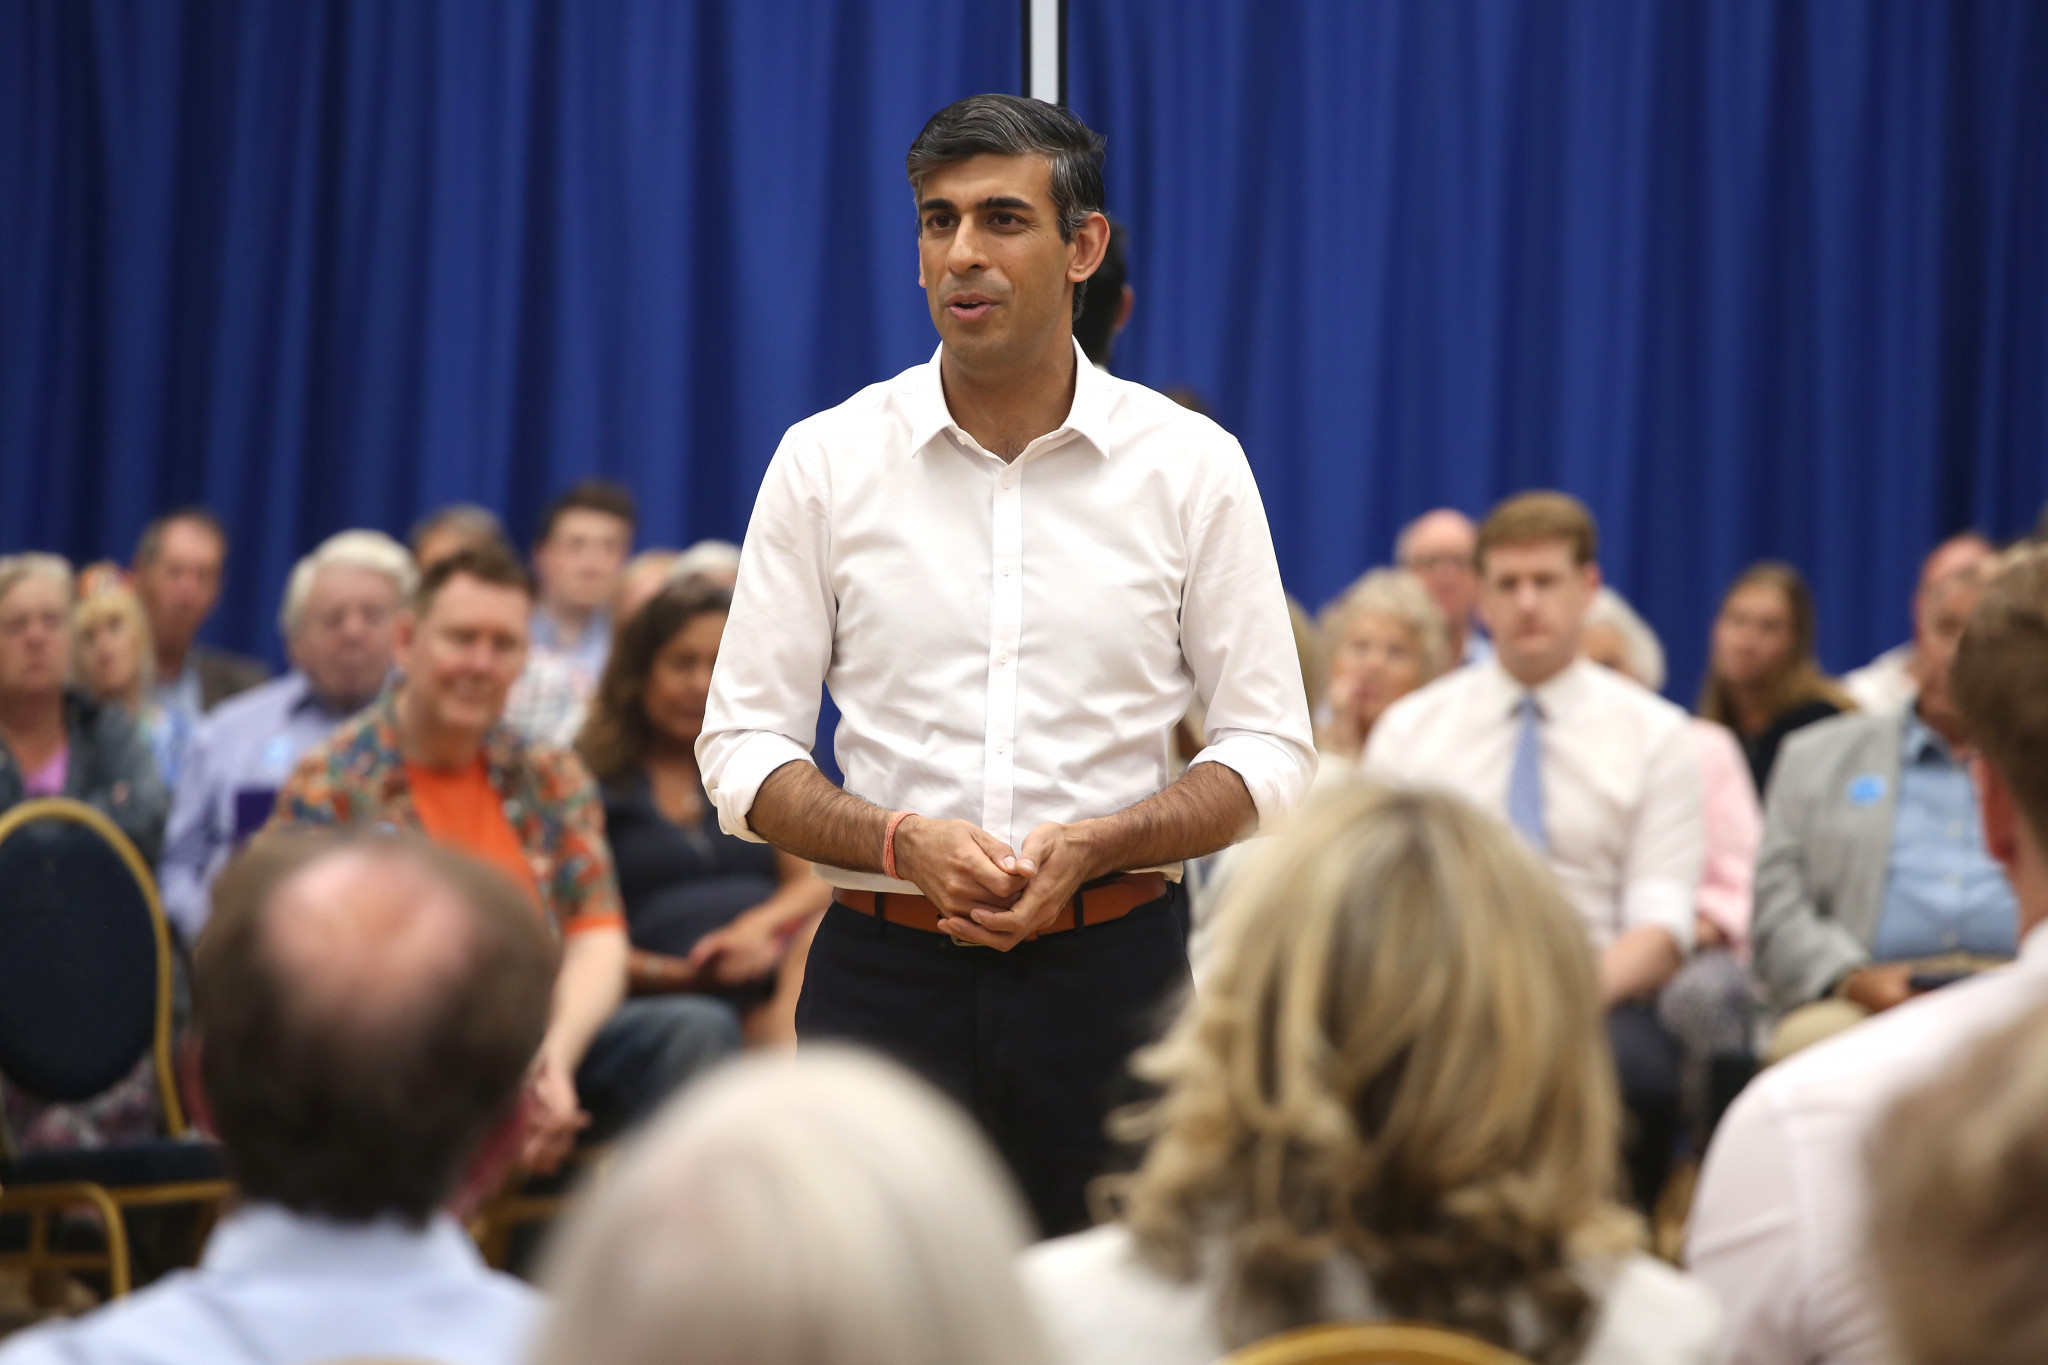 British Prime Ministerial candidate Rishi Sunak was one of the politicians referenced in the Facebook post of Scottish Para lawn bowler Garry Hood ©Getty Images